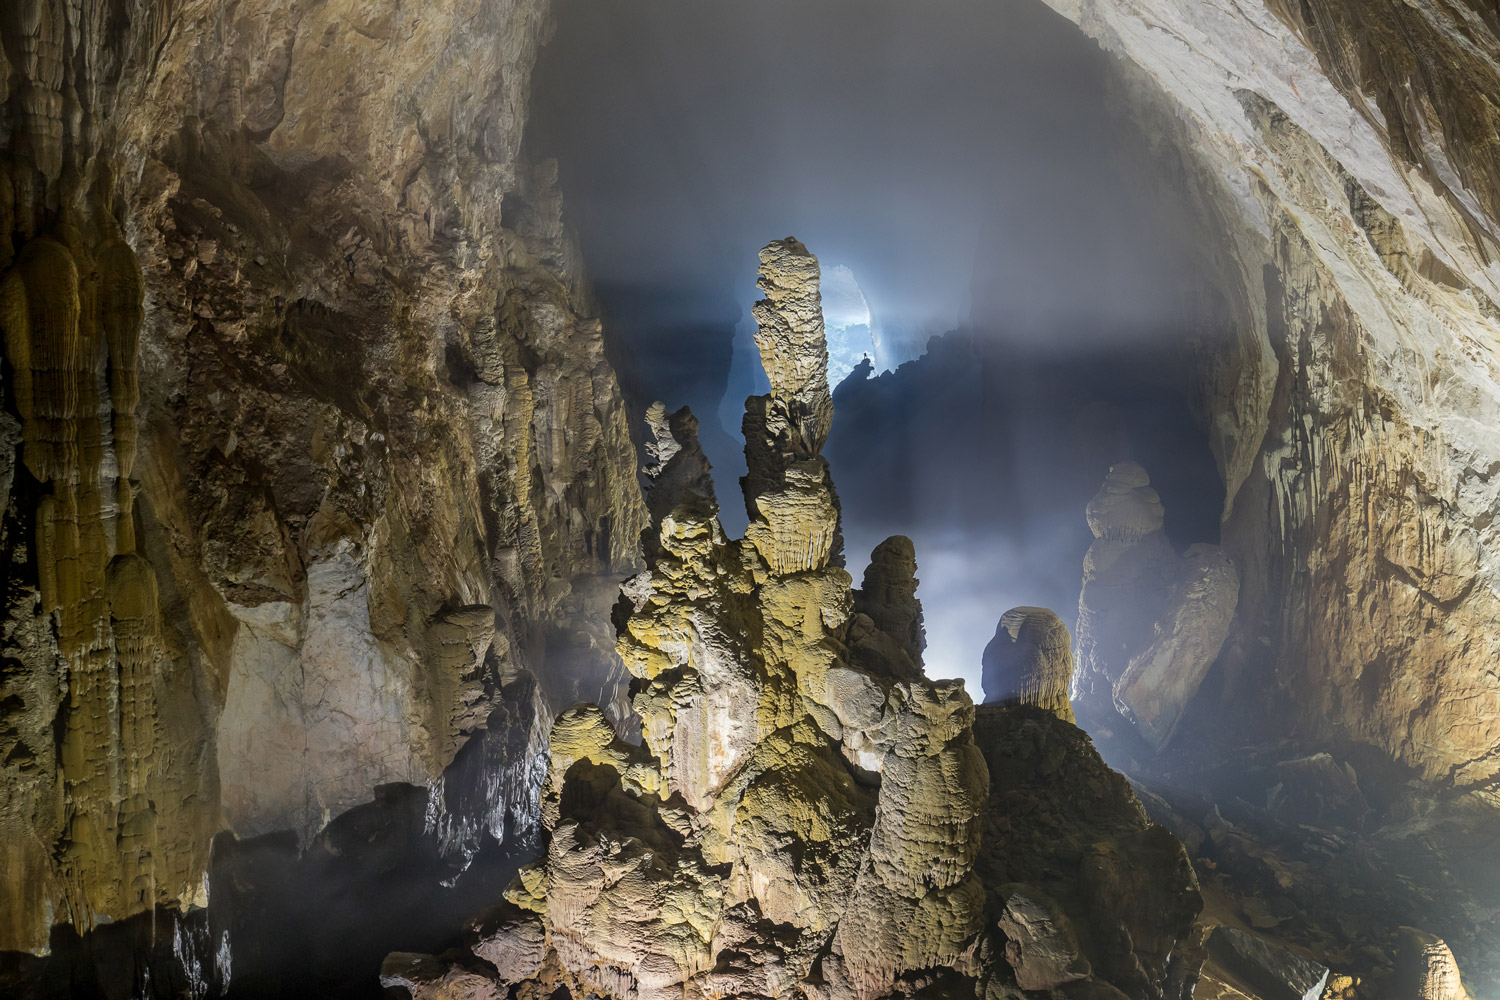 The highest stalagmite in Son Doong Cave is up to 80m